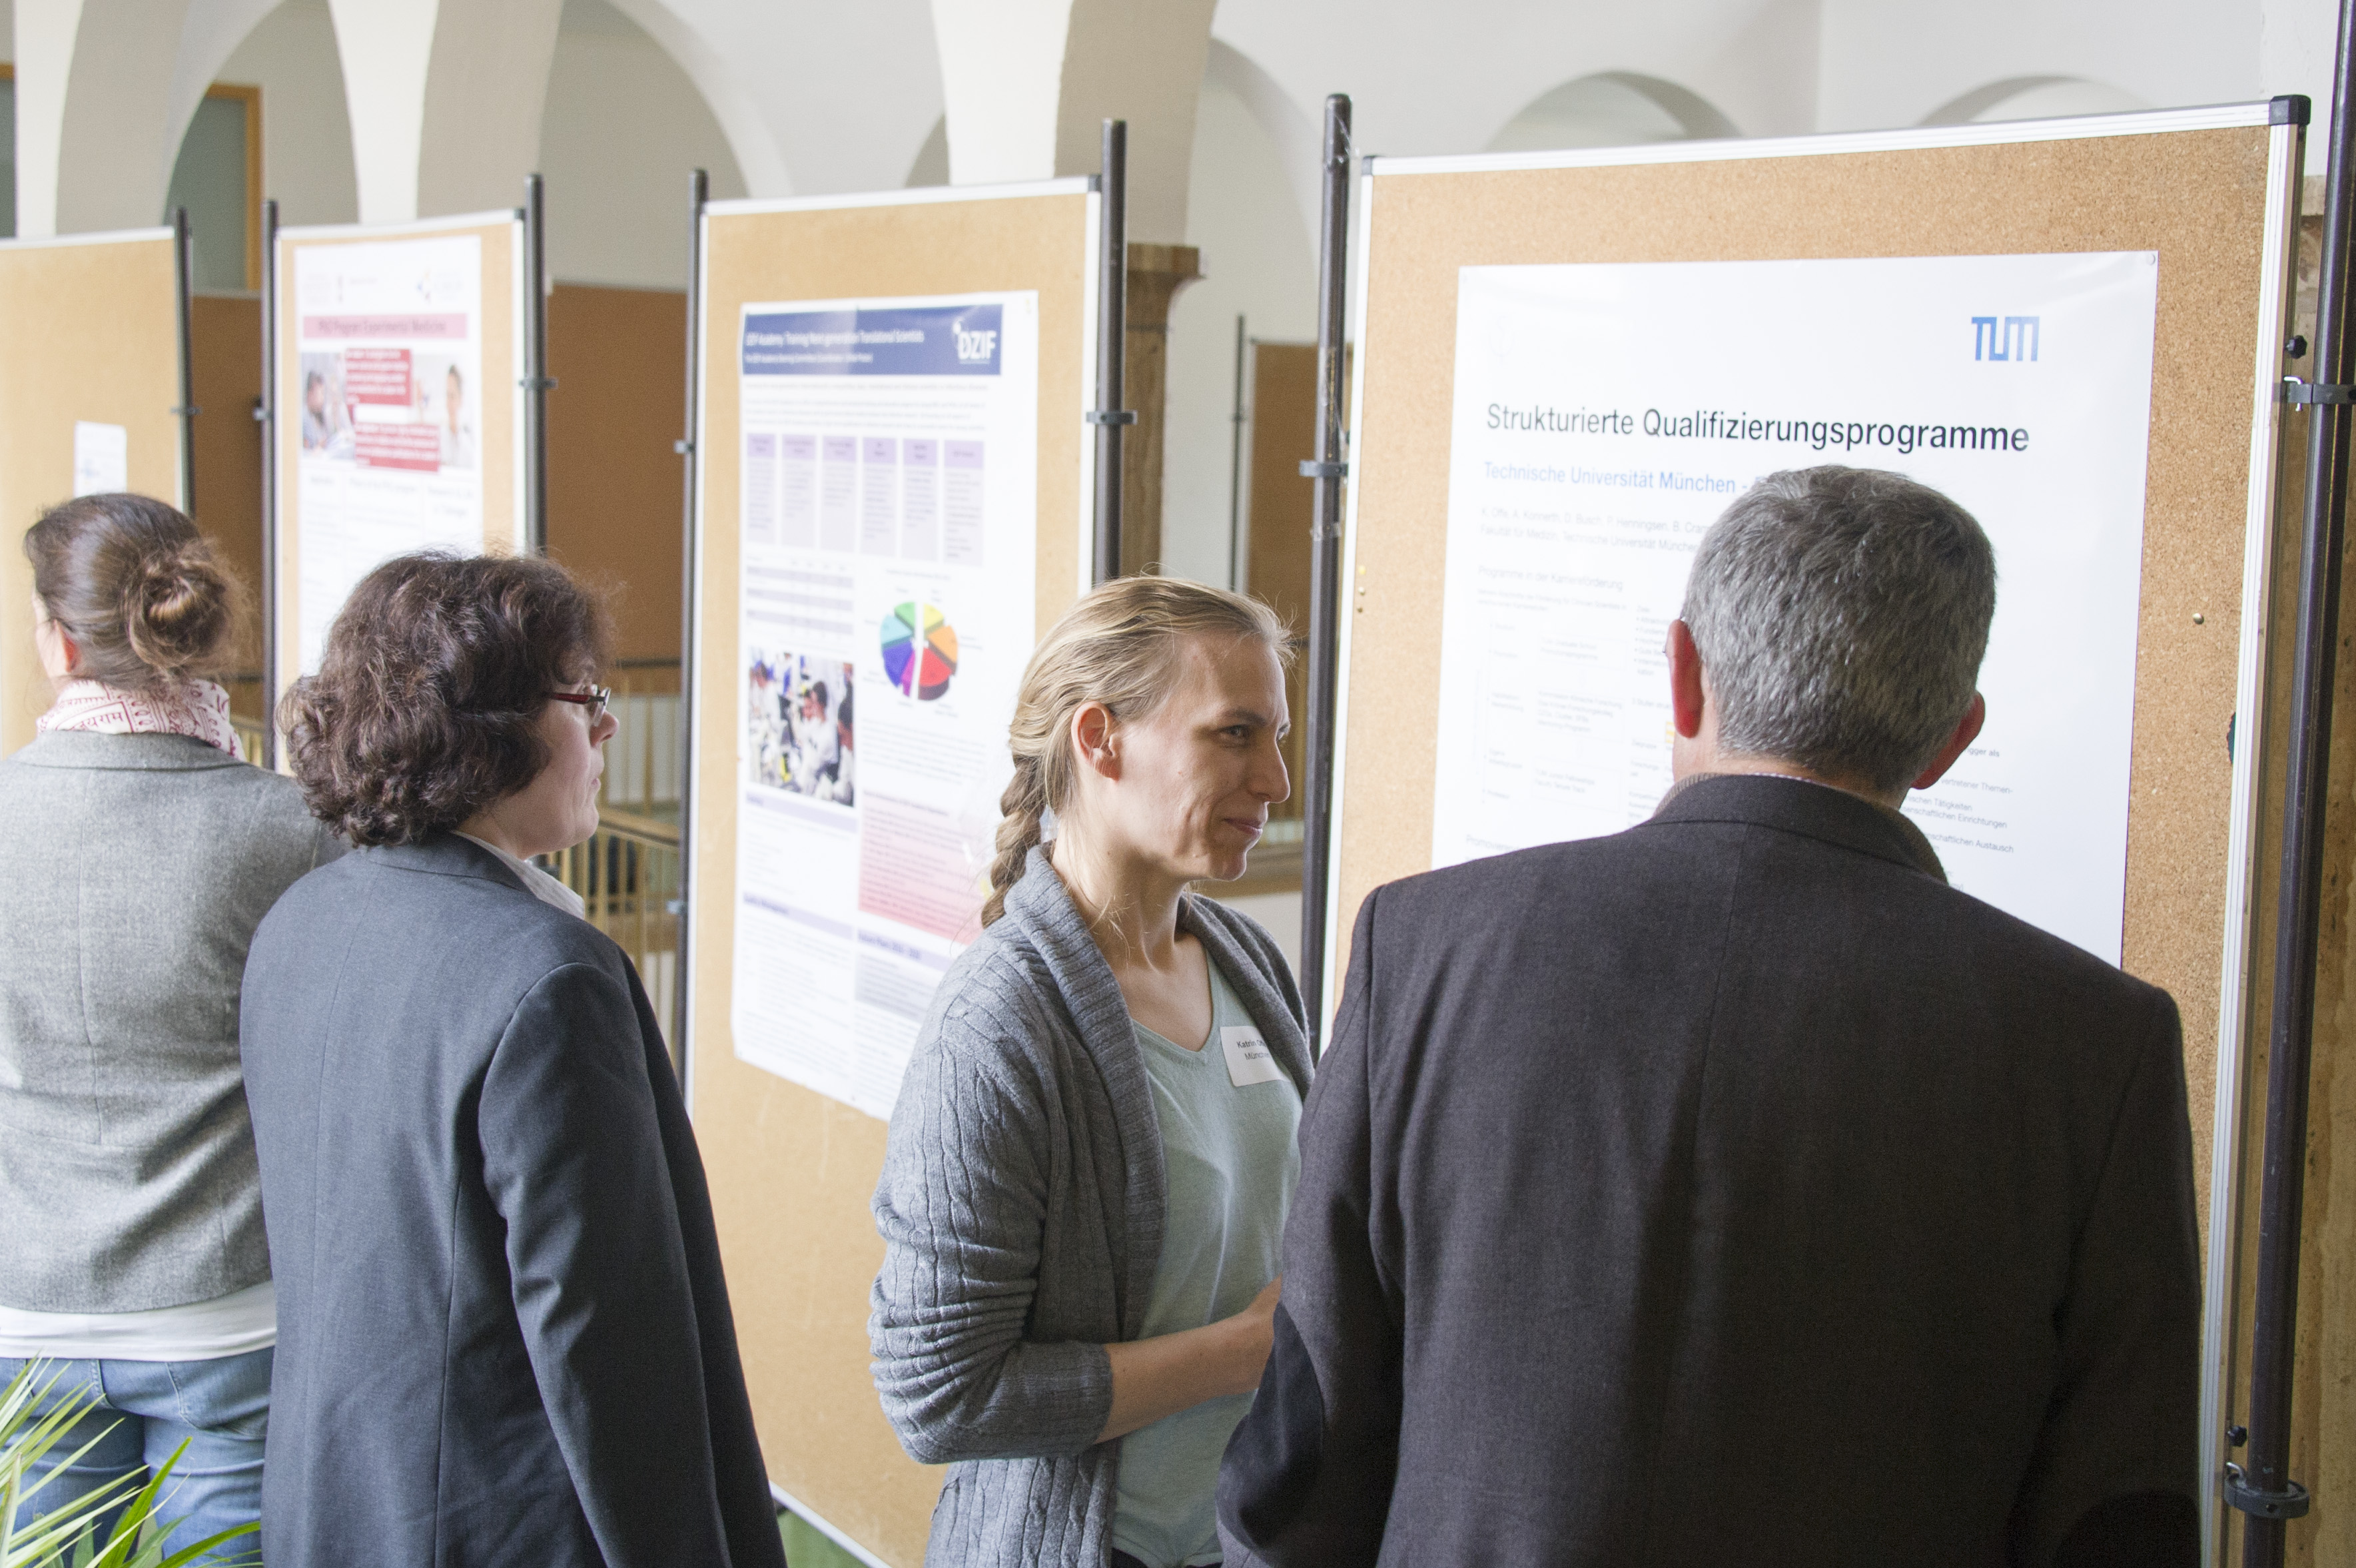 The poster exhibition provided opportunities for in-depth talks.